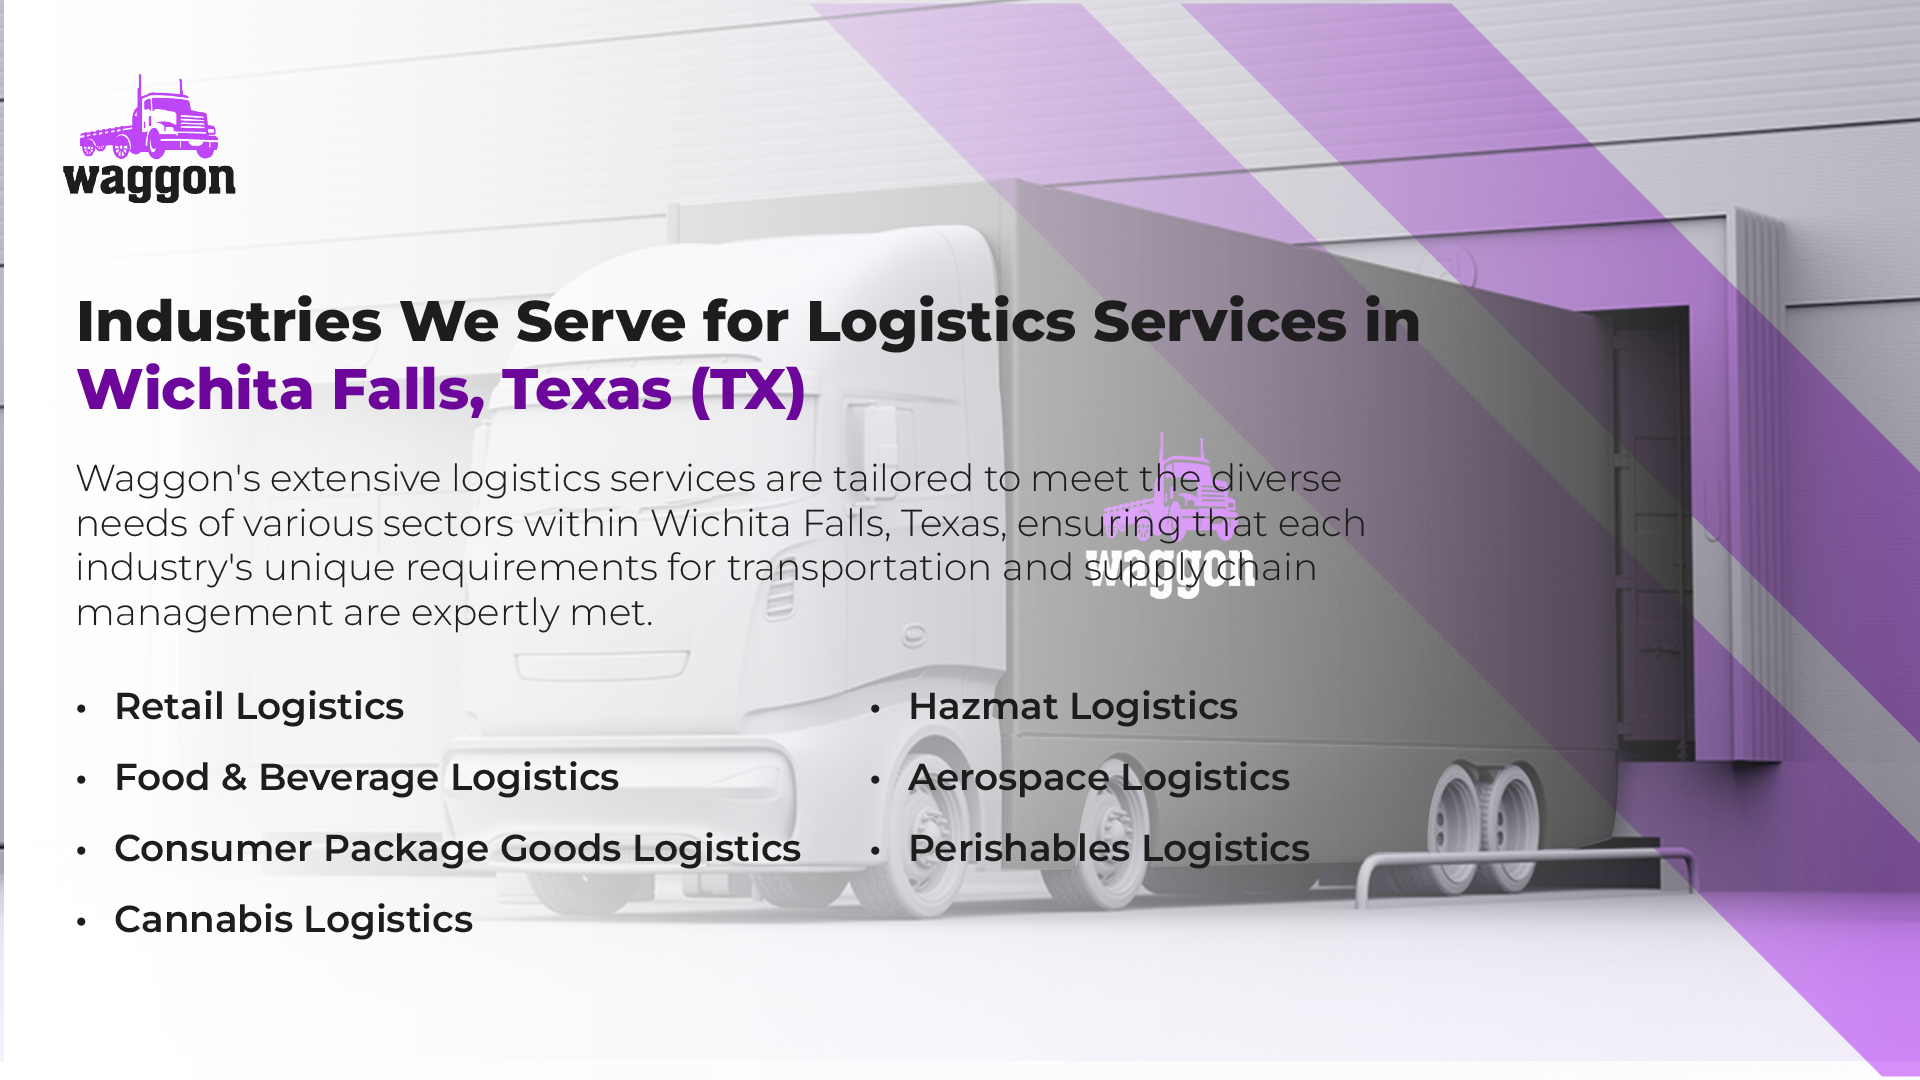 Industries We Serve for Logistics Services in Wichita Falls, Texas (TX)